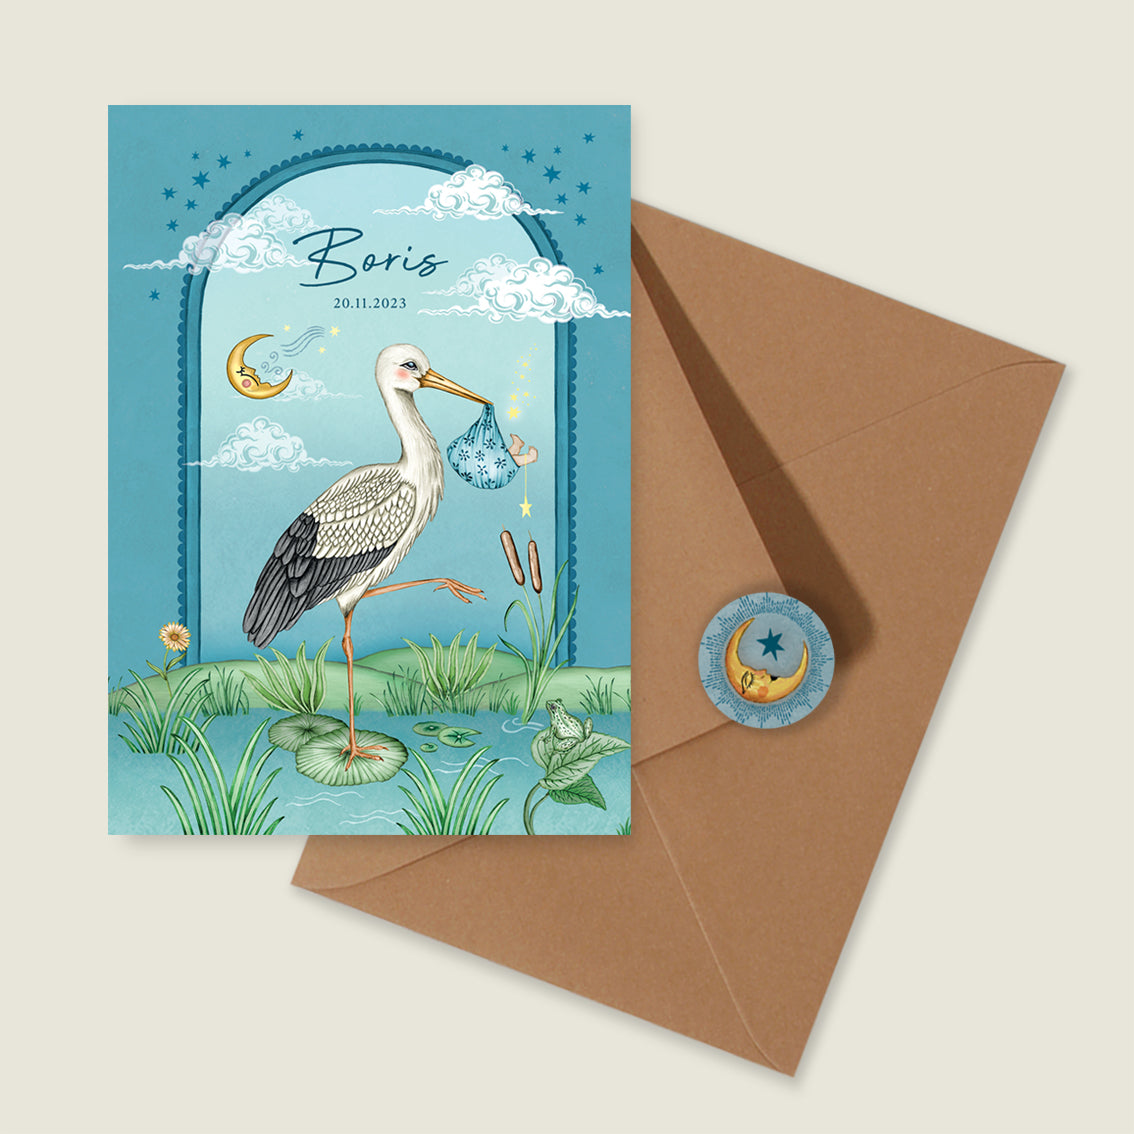 Stork and baby Blue